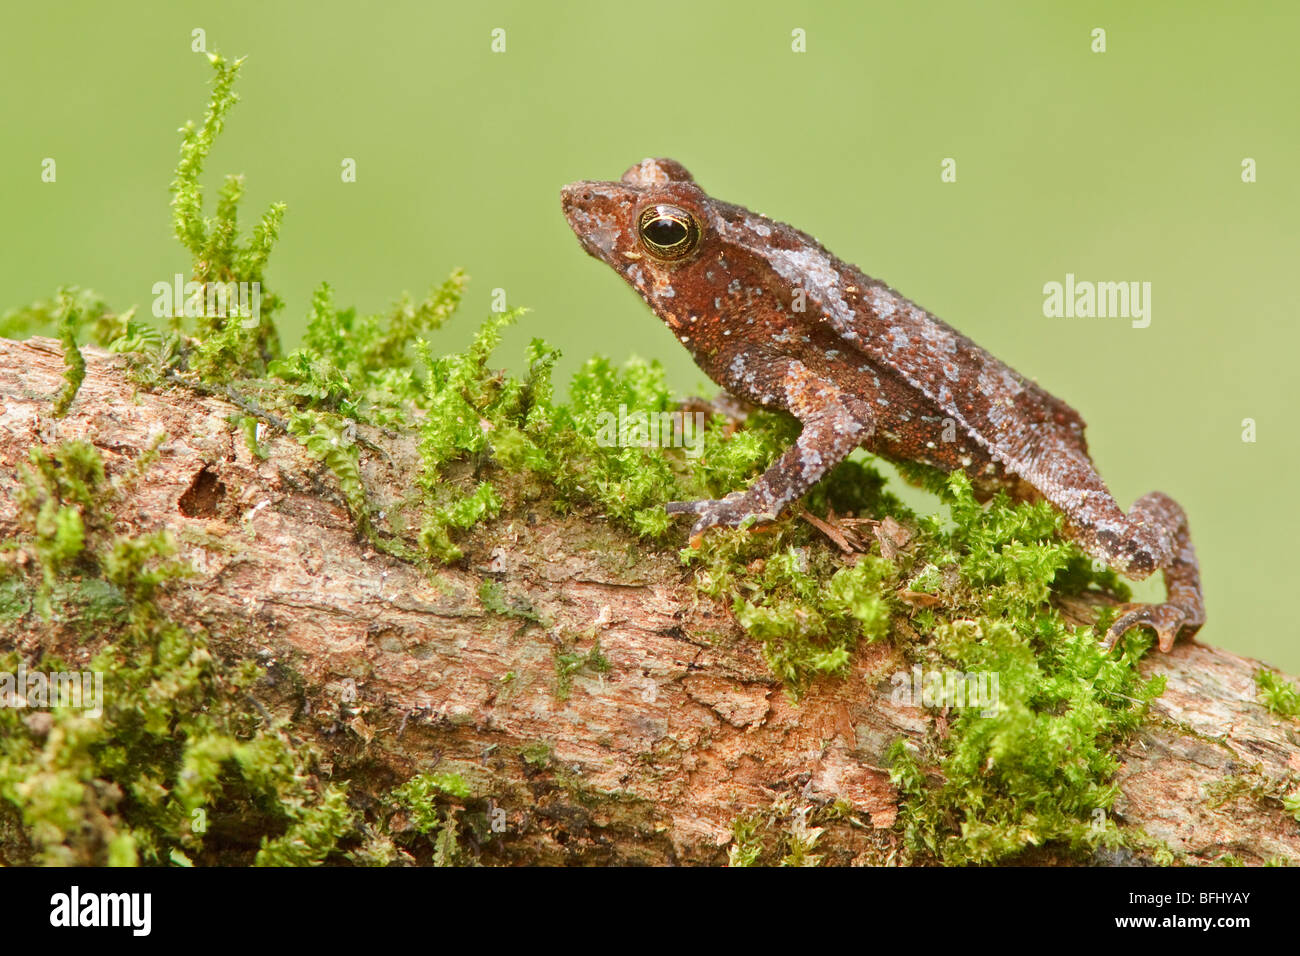 A frog perched on a mossy branch in Amazonian Ecuador. Stock Photo